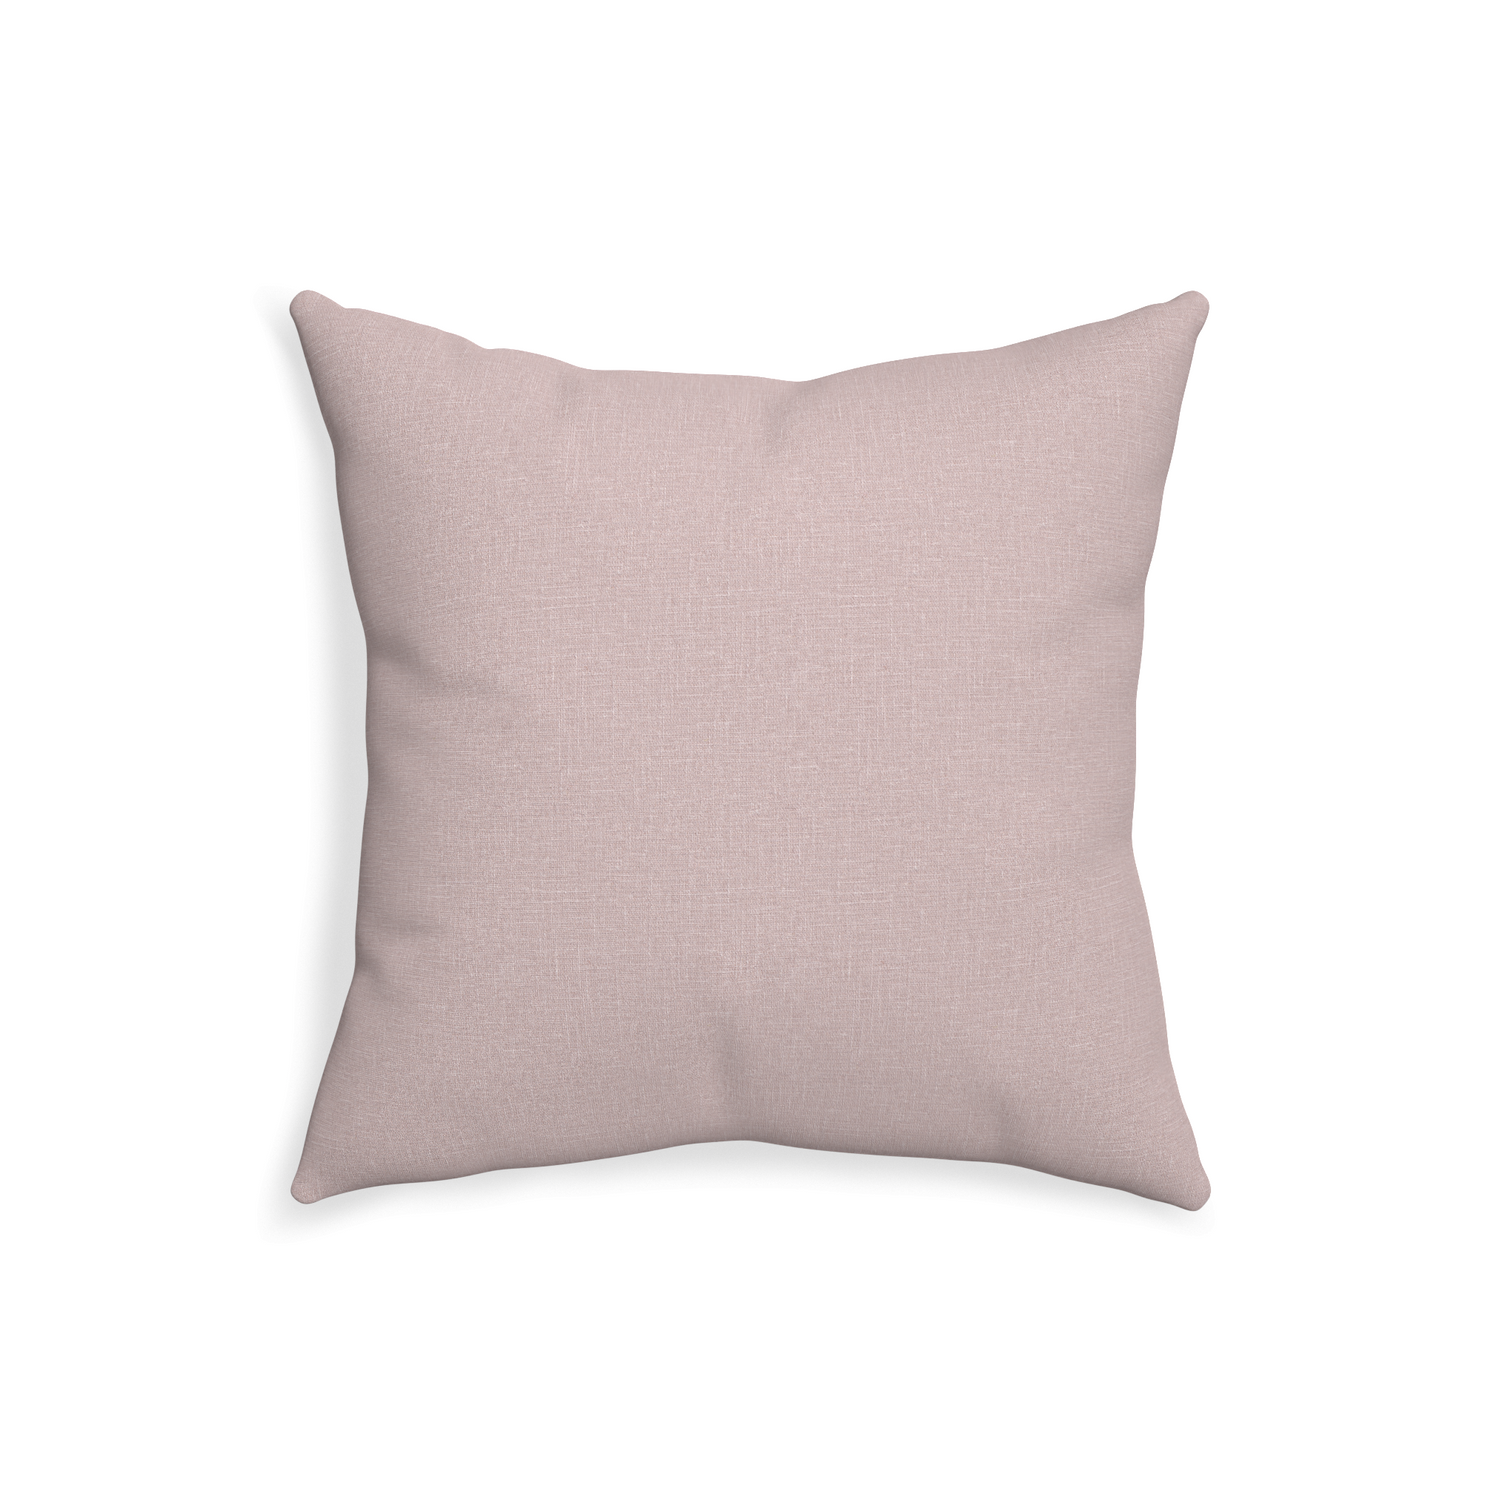 20-square orchid custom mauve pinkpillow with none on white background